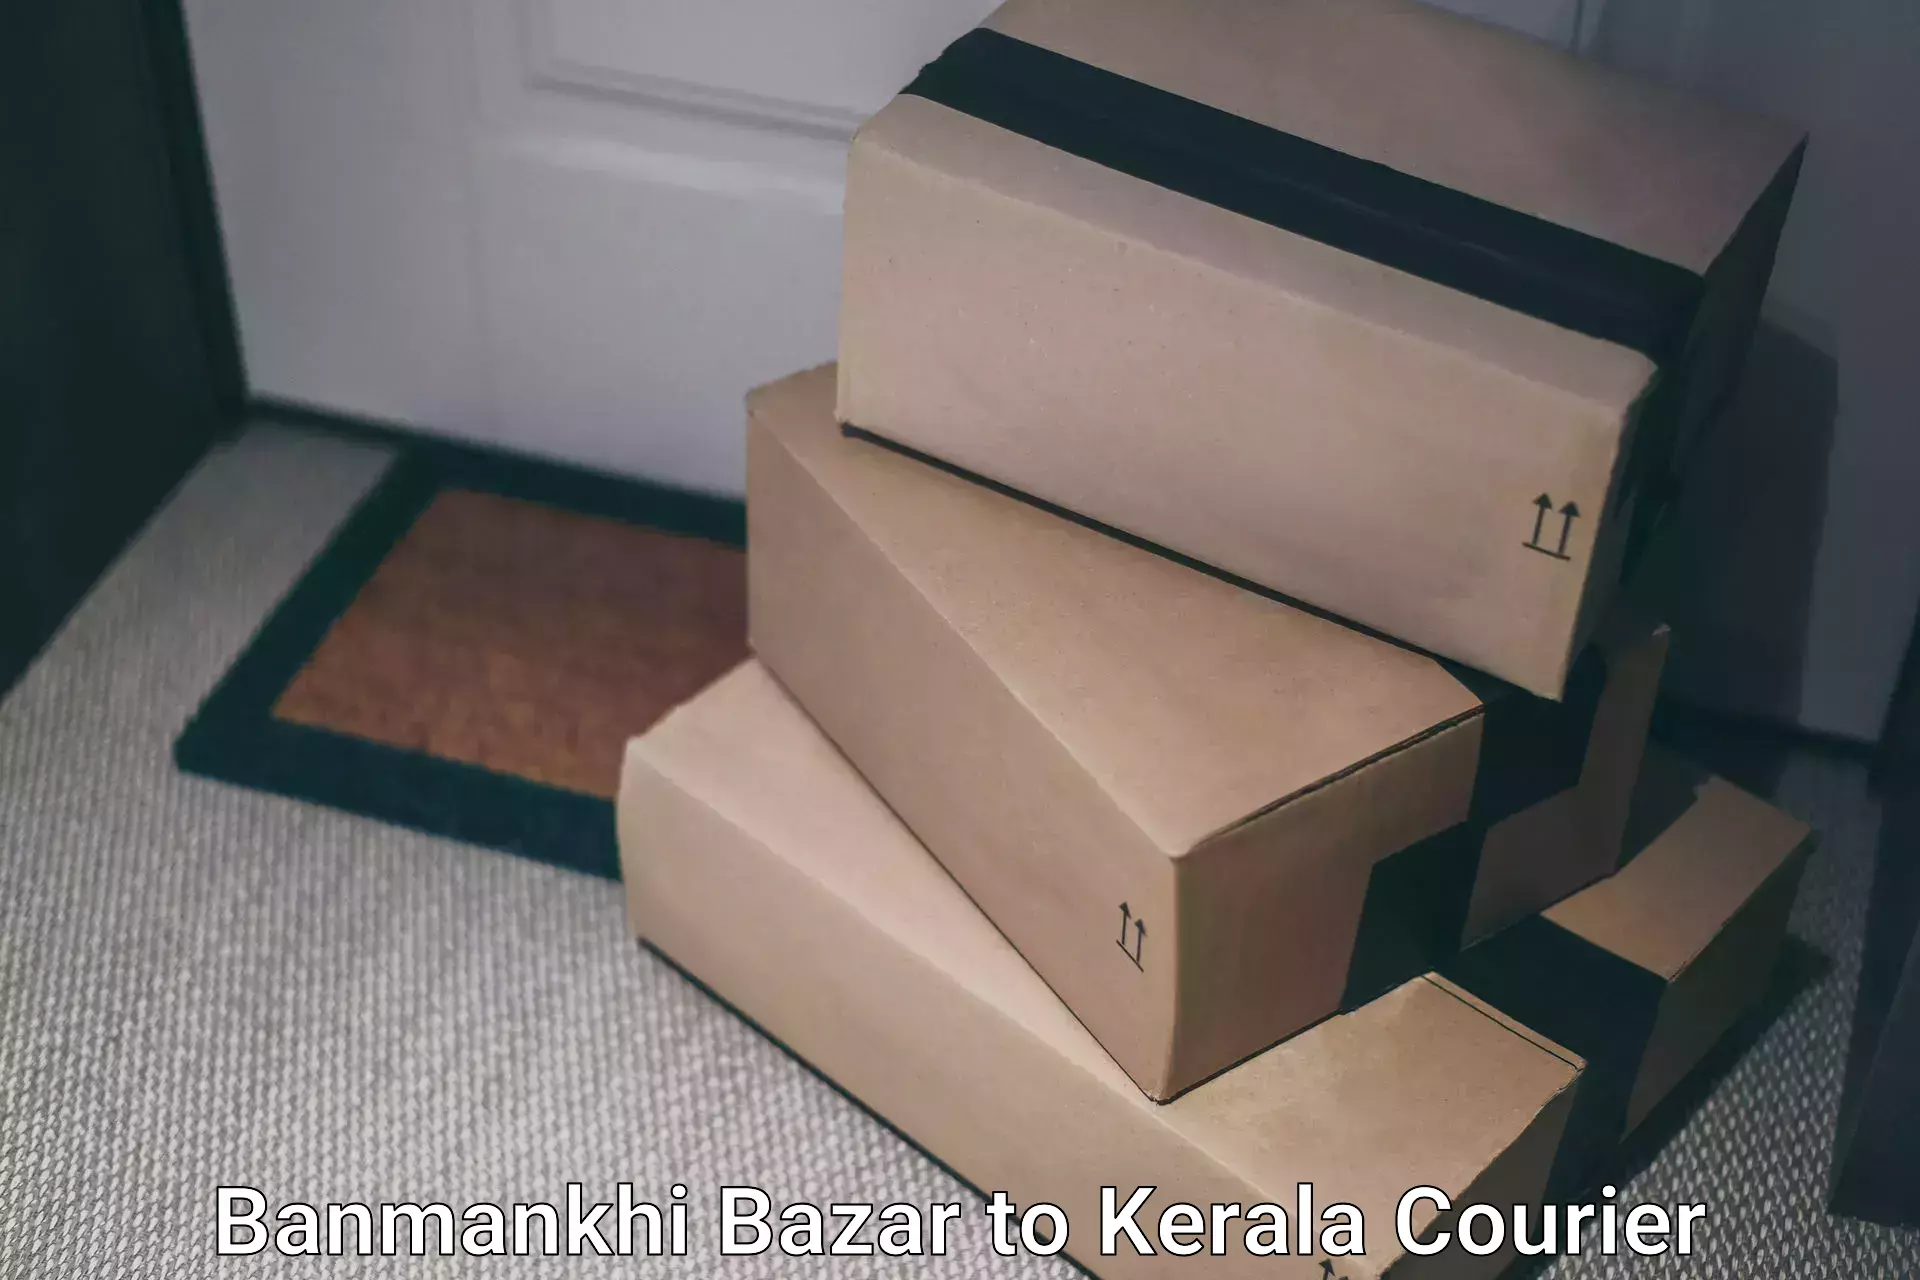 Overnight delivery services Banmankhi Bazar to Vaikom